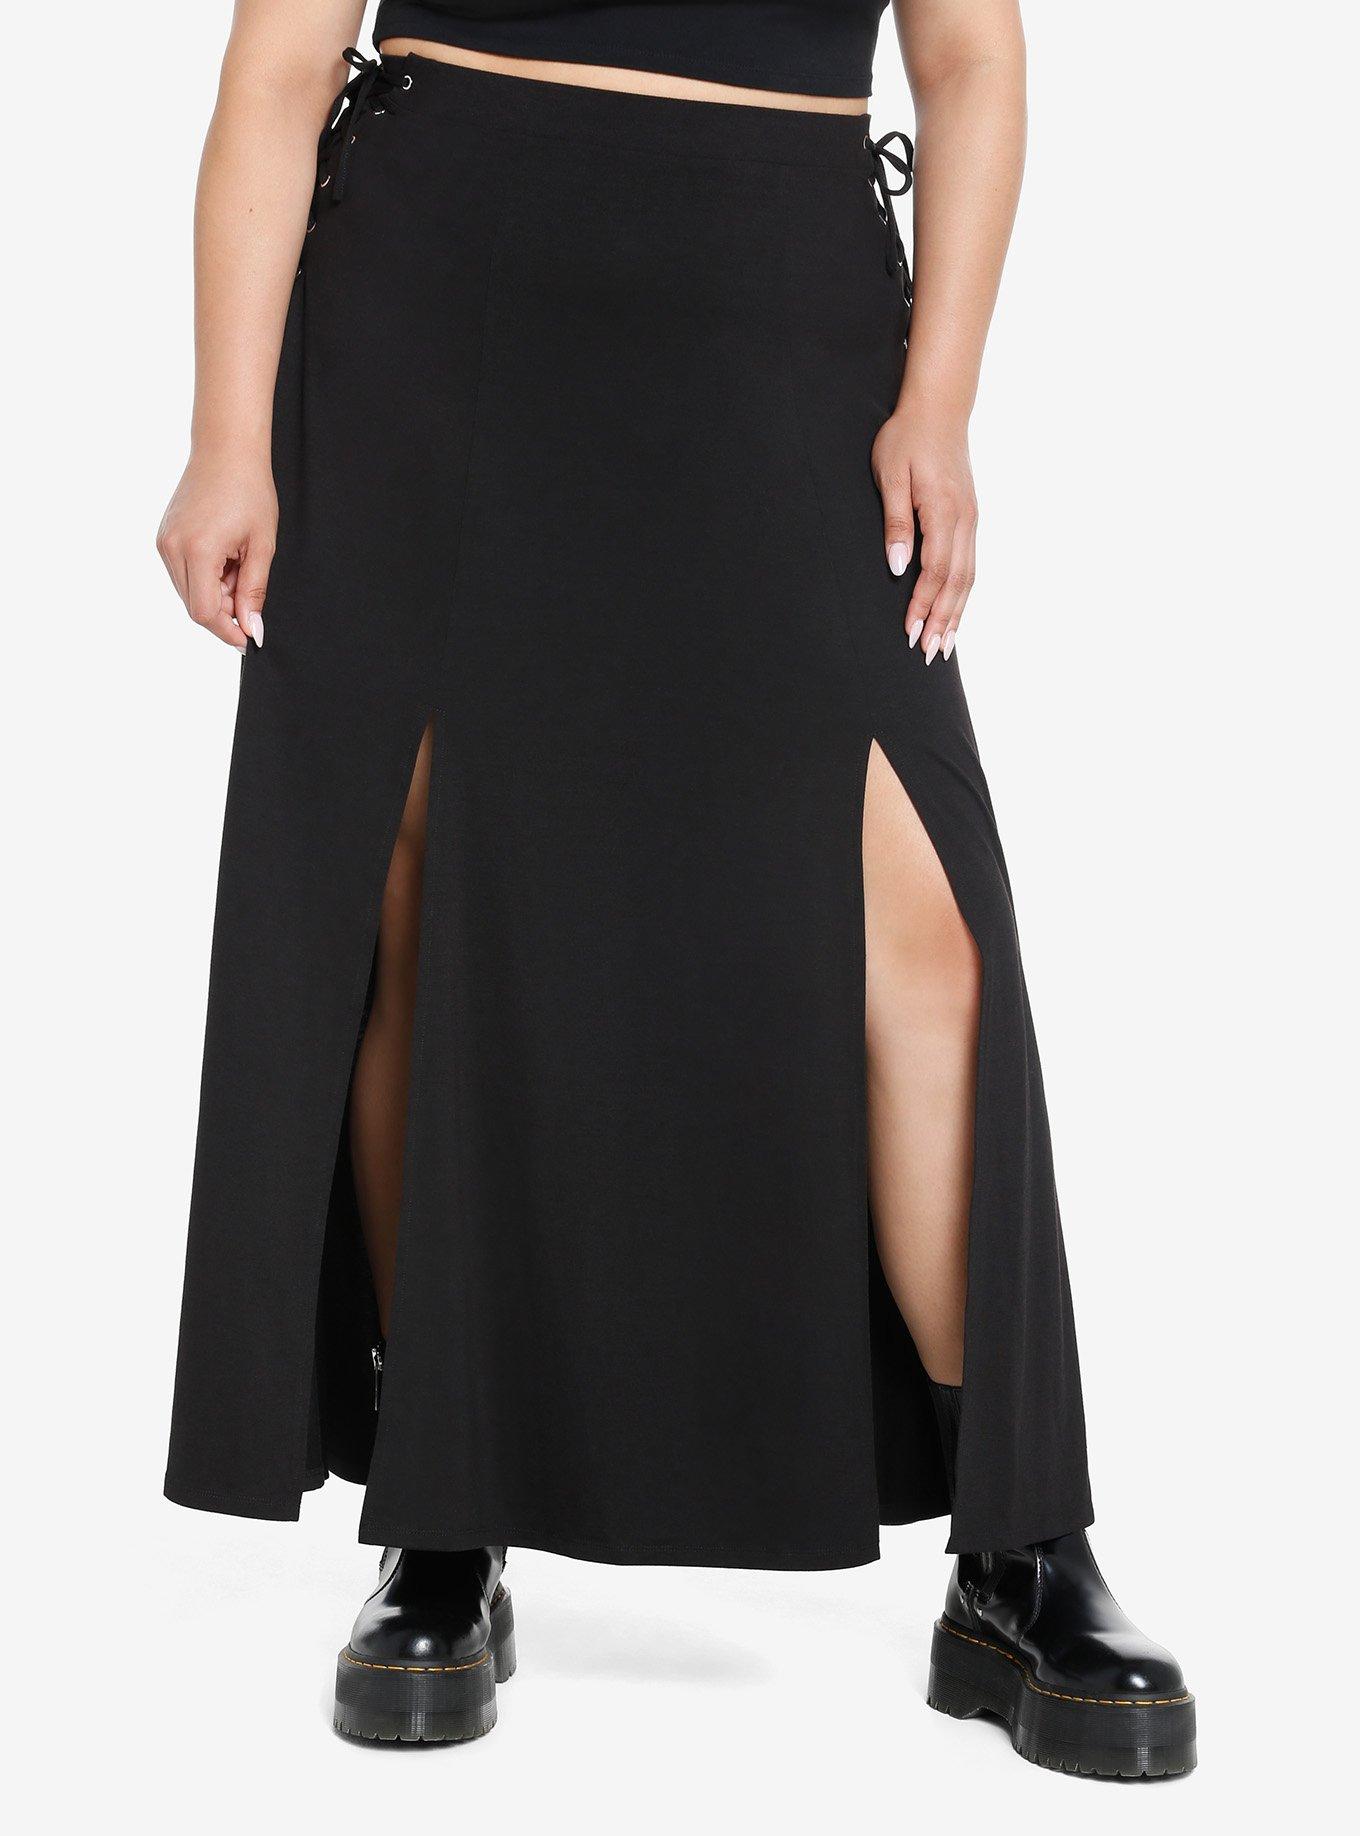 Social Collision Lace-Up Slit Maxi Skirt Plus Size | Hot Topic